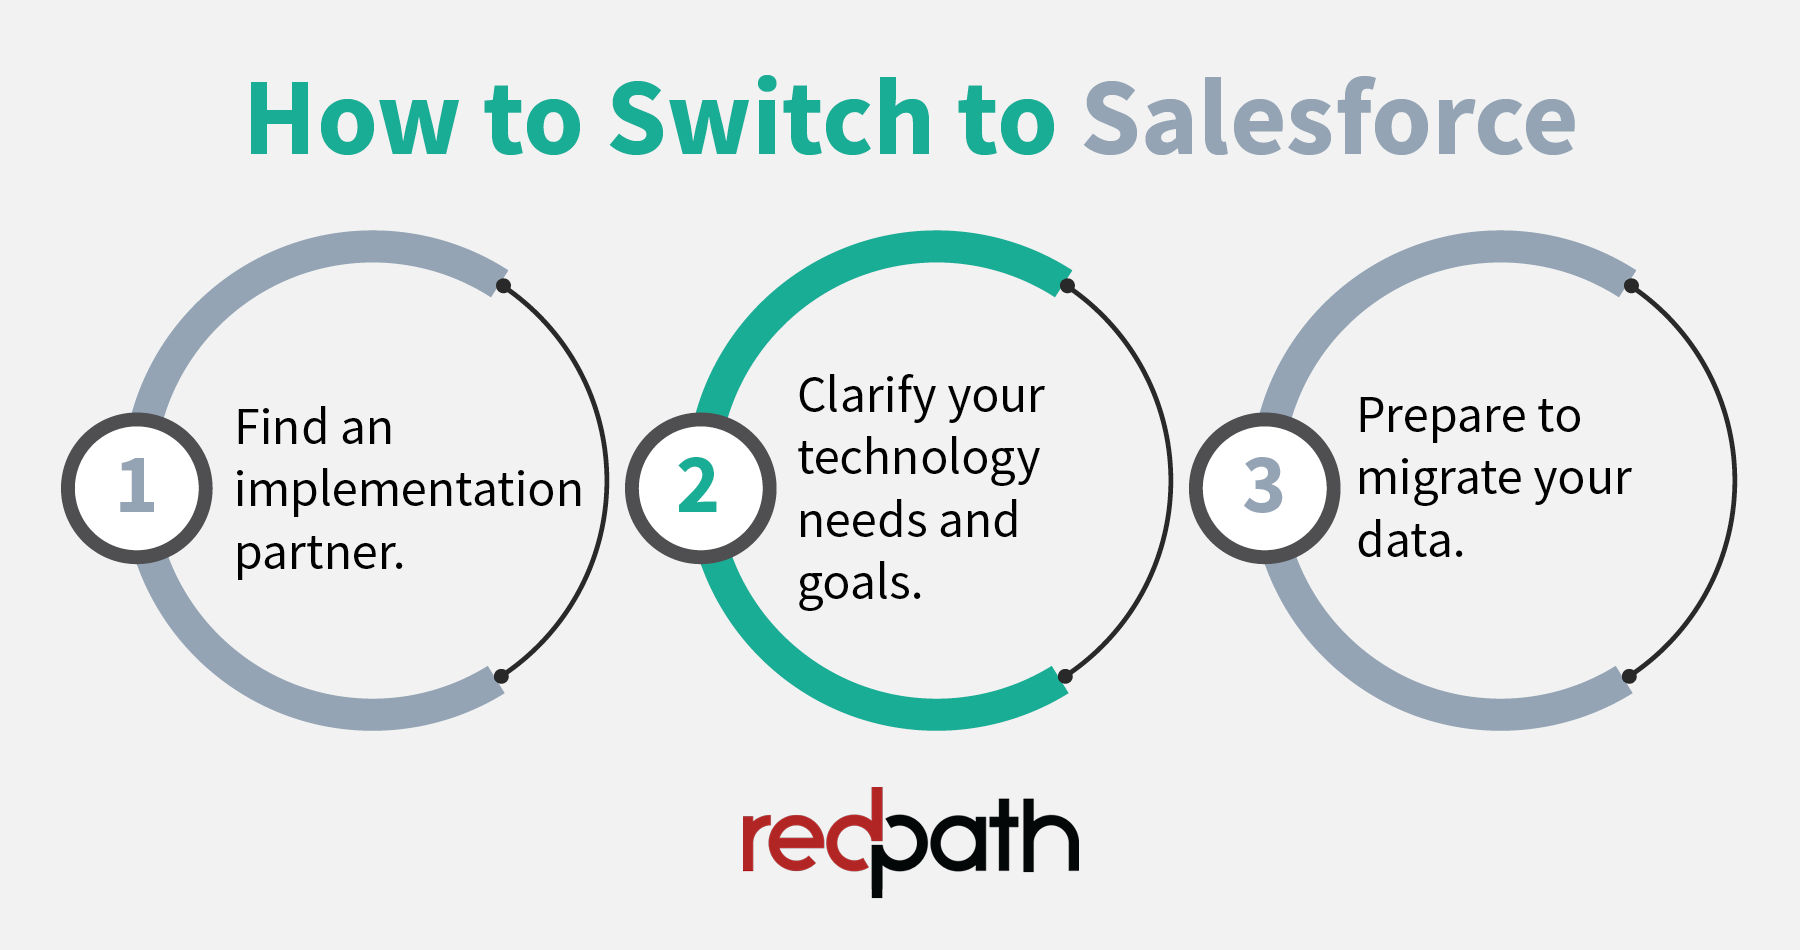 A graphic showing the three steps to switch from Raiser’s Edge to Salesforce, explained in the text below